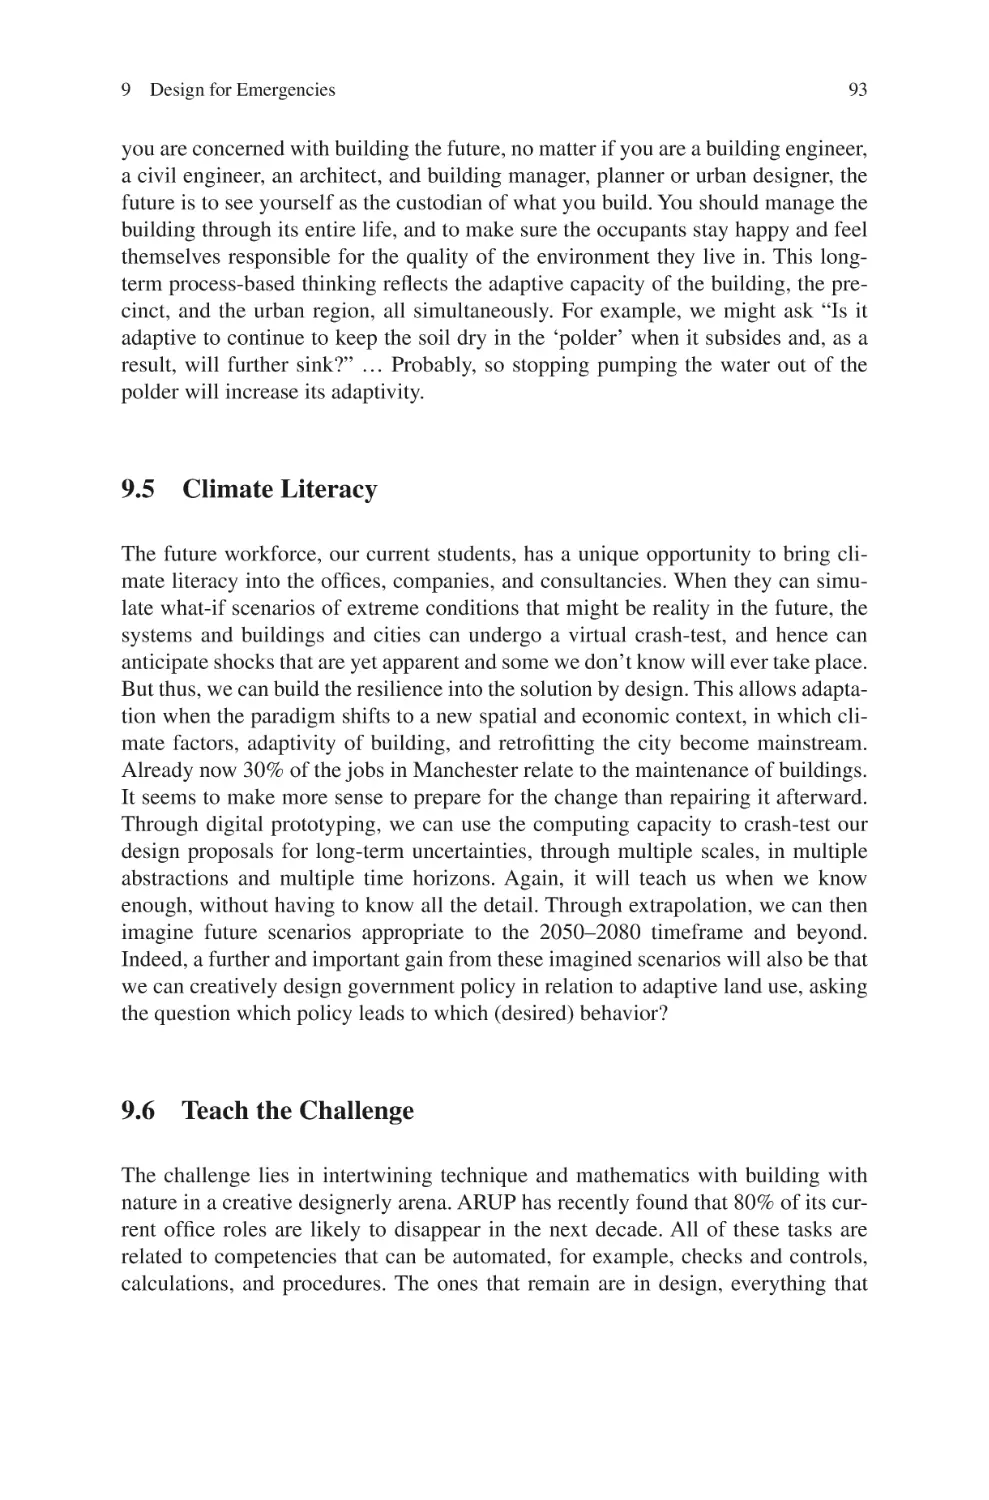 9.5 Climate Literacy
9.6 Teach the Challenge